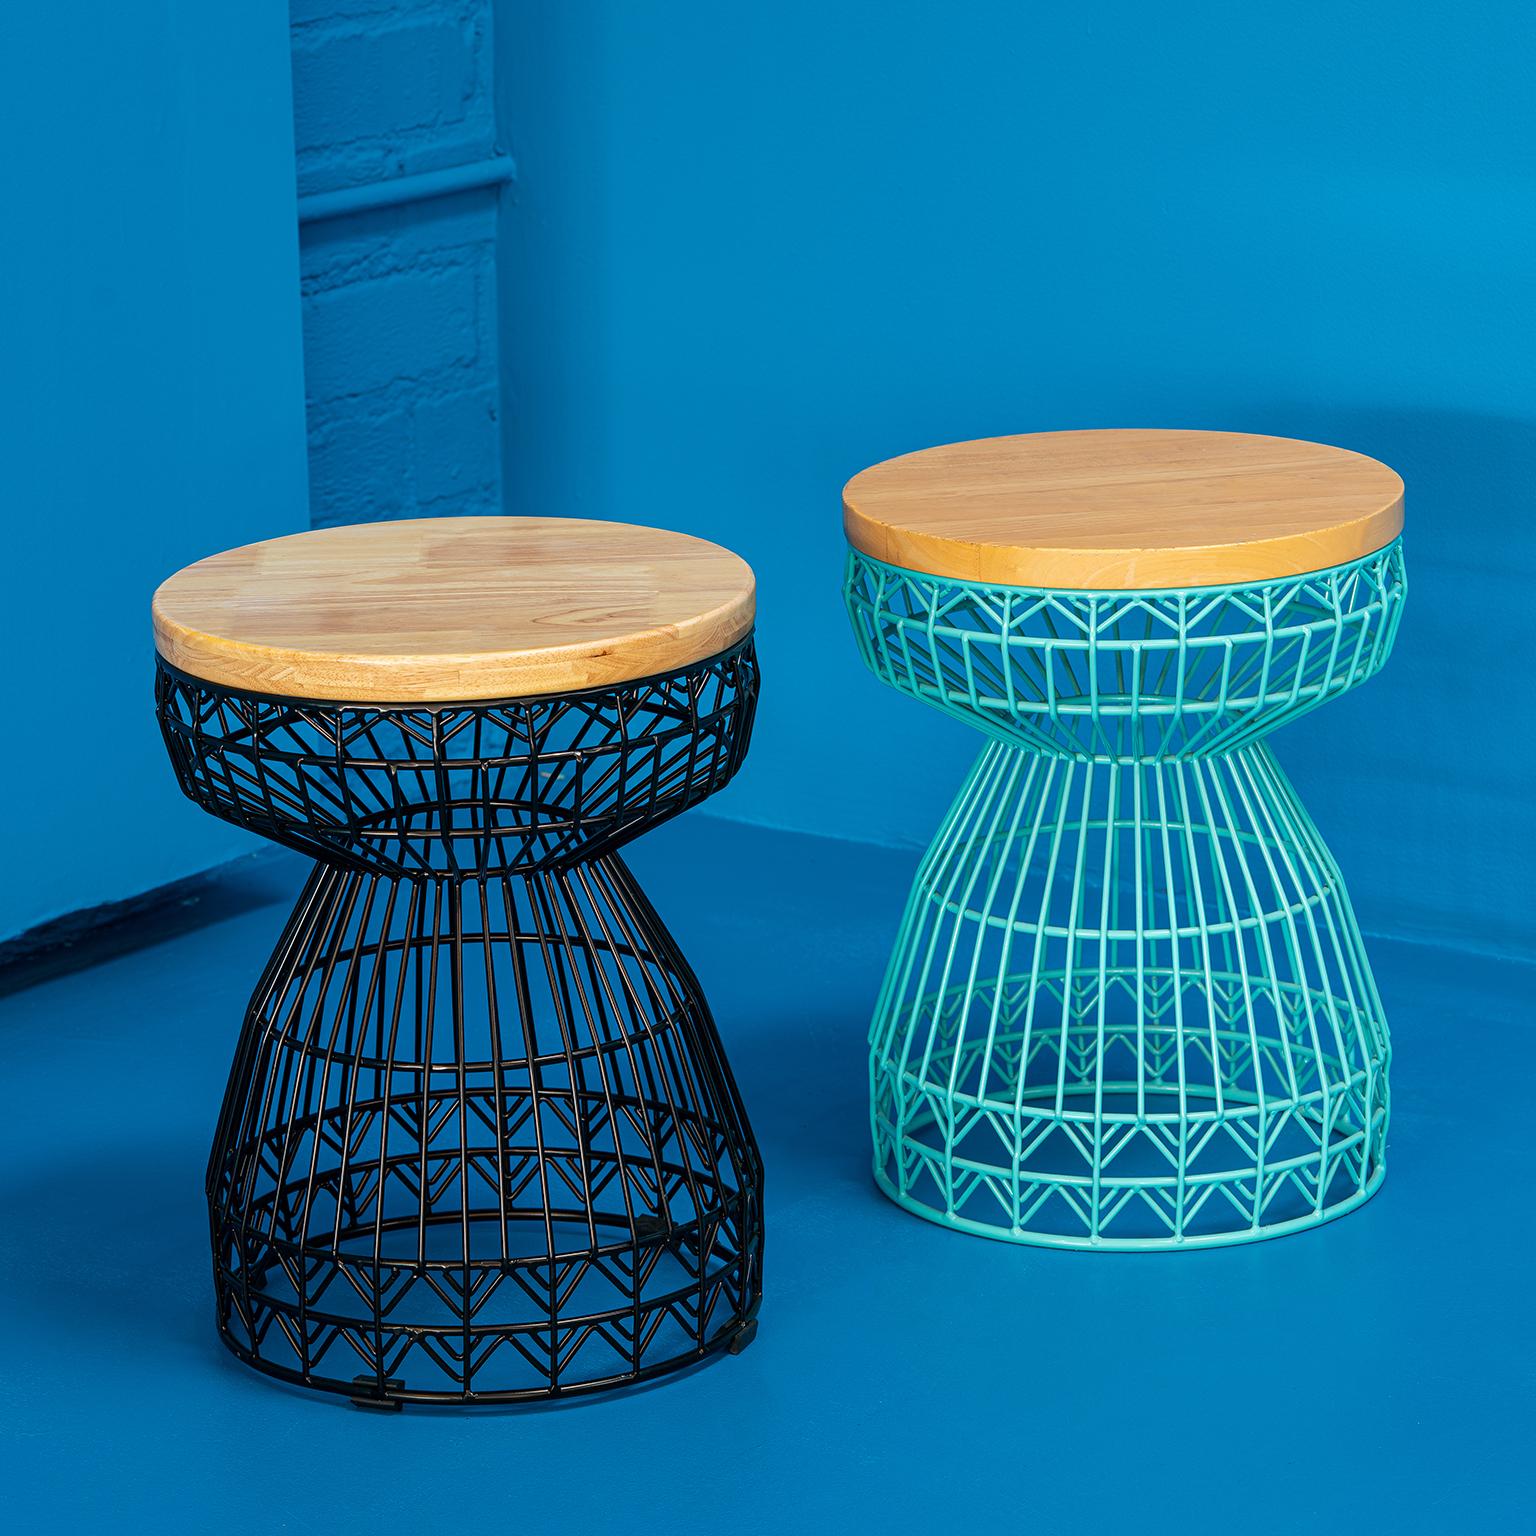 Powder-Coated Modern Wire Stool with a Wood Seat, Sweet Stool in Black by Bend Goods